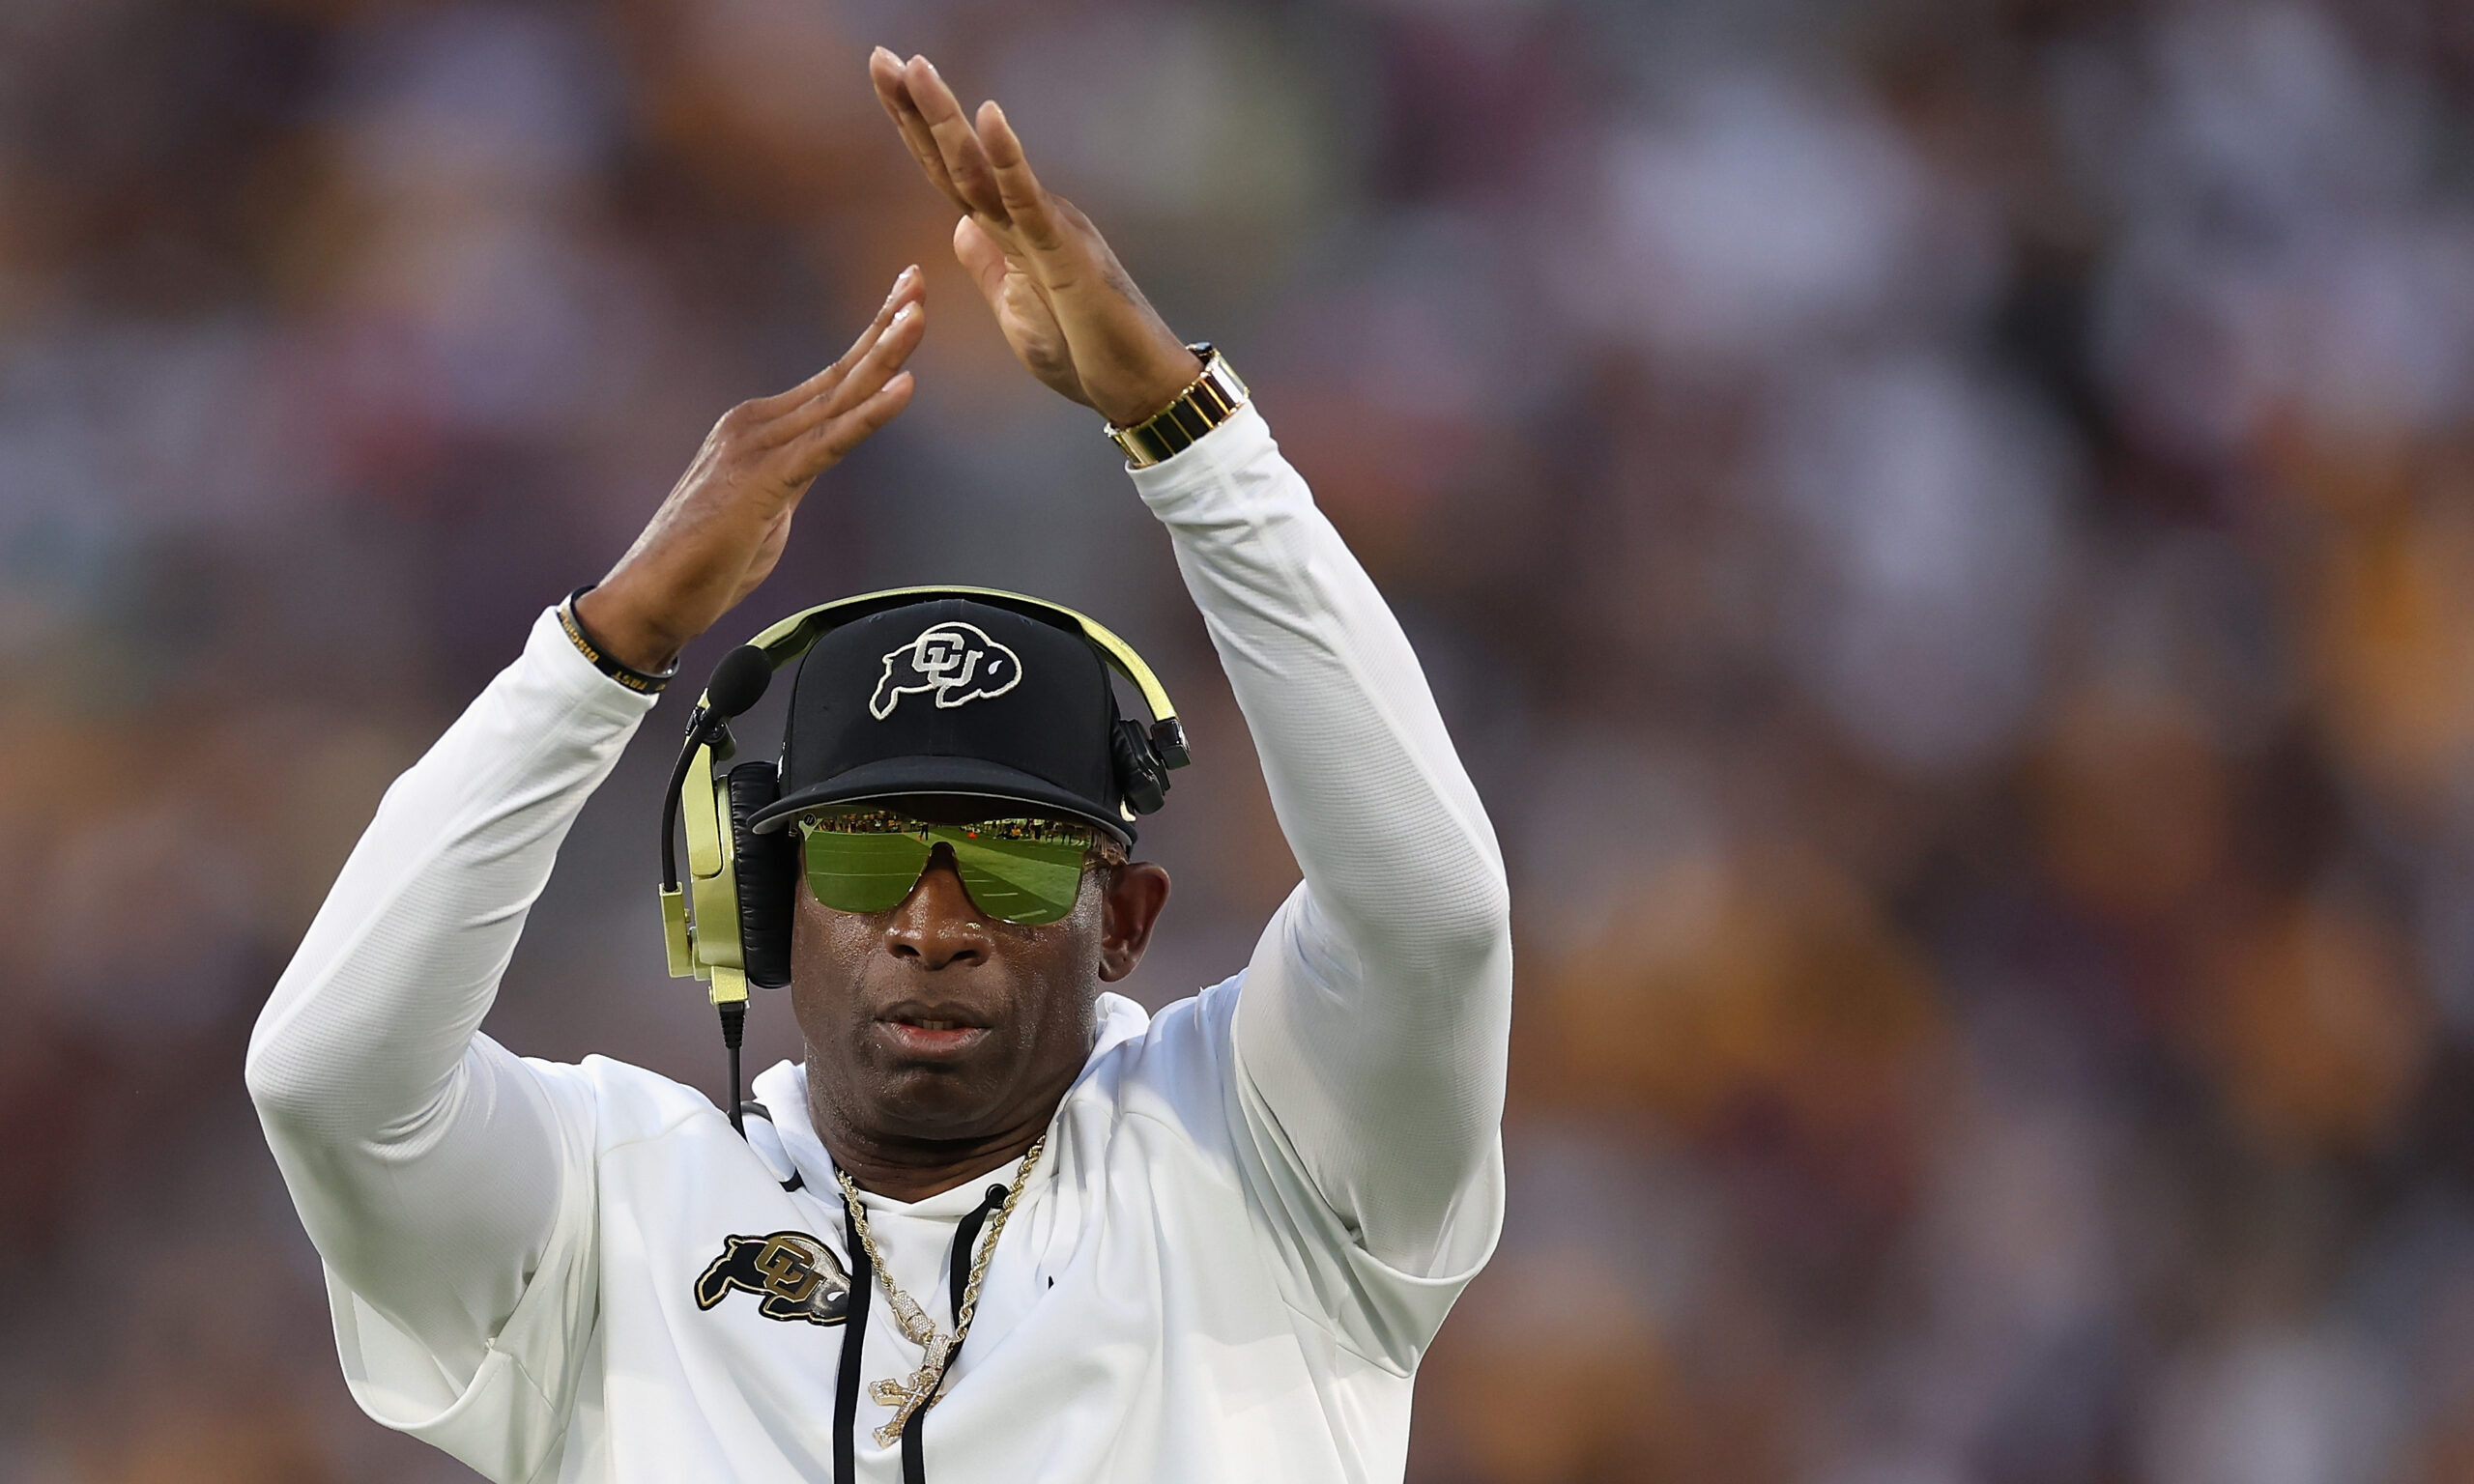 Deion Sanders' Colorado falls to their first defeat of the season